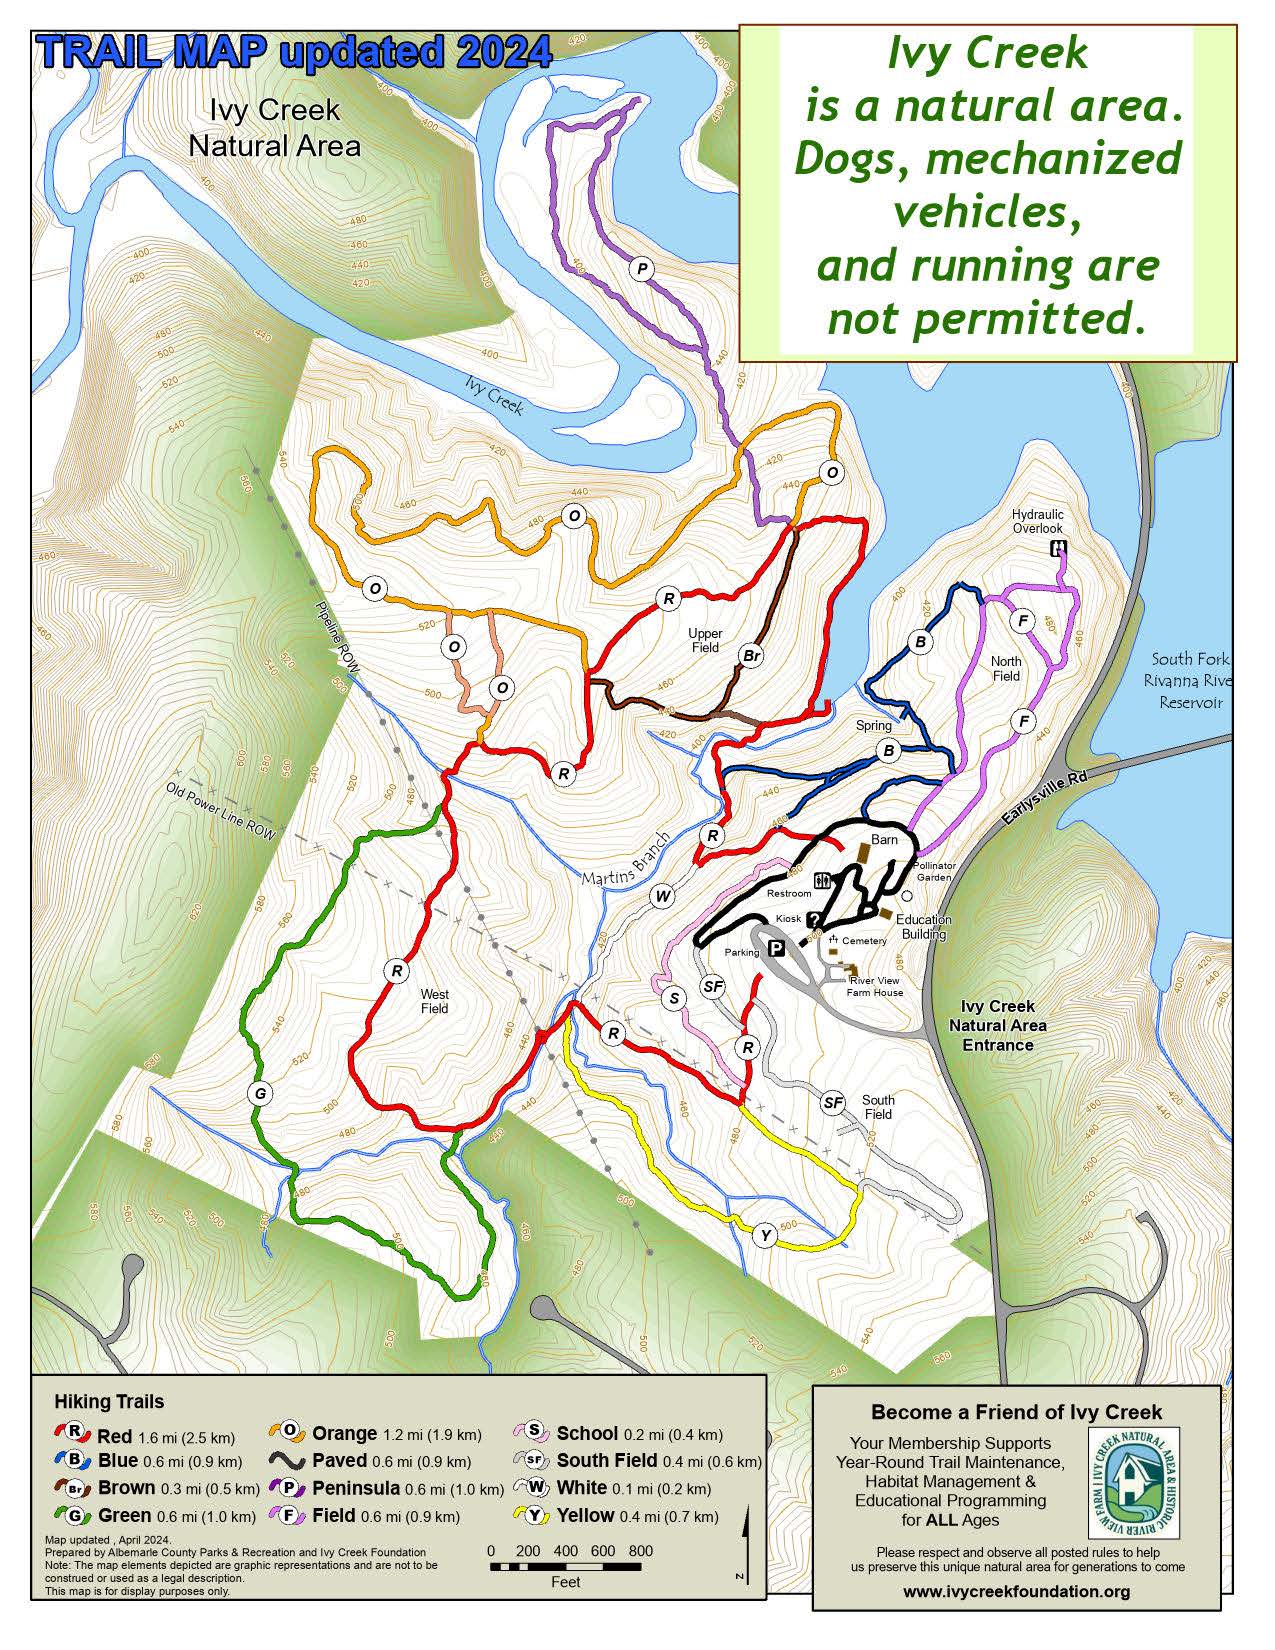 Trail Map Revised 04-24